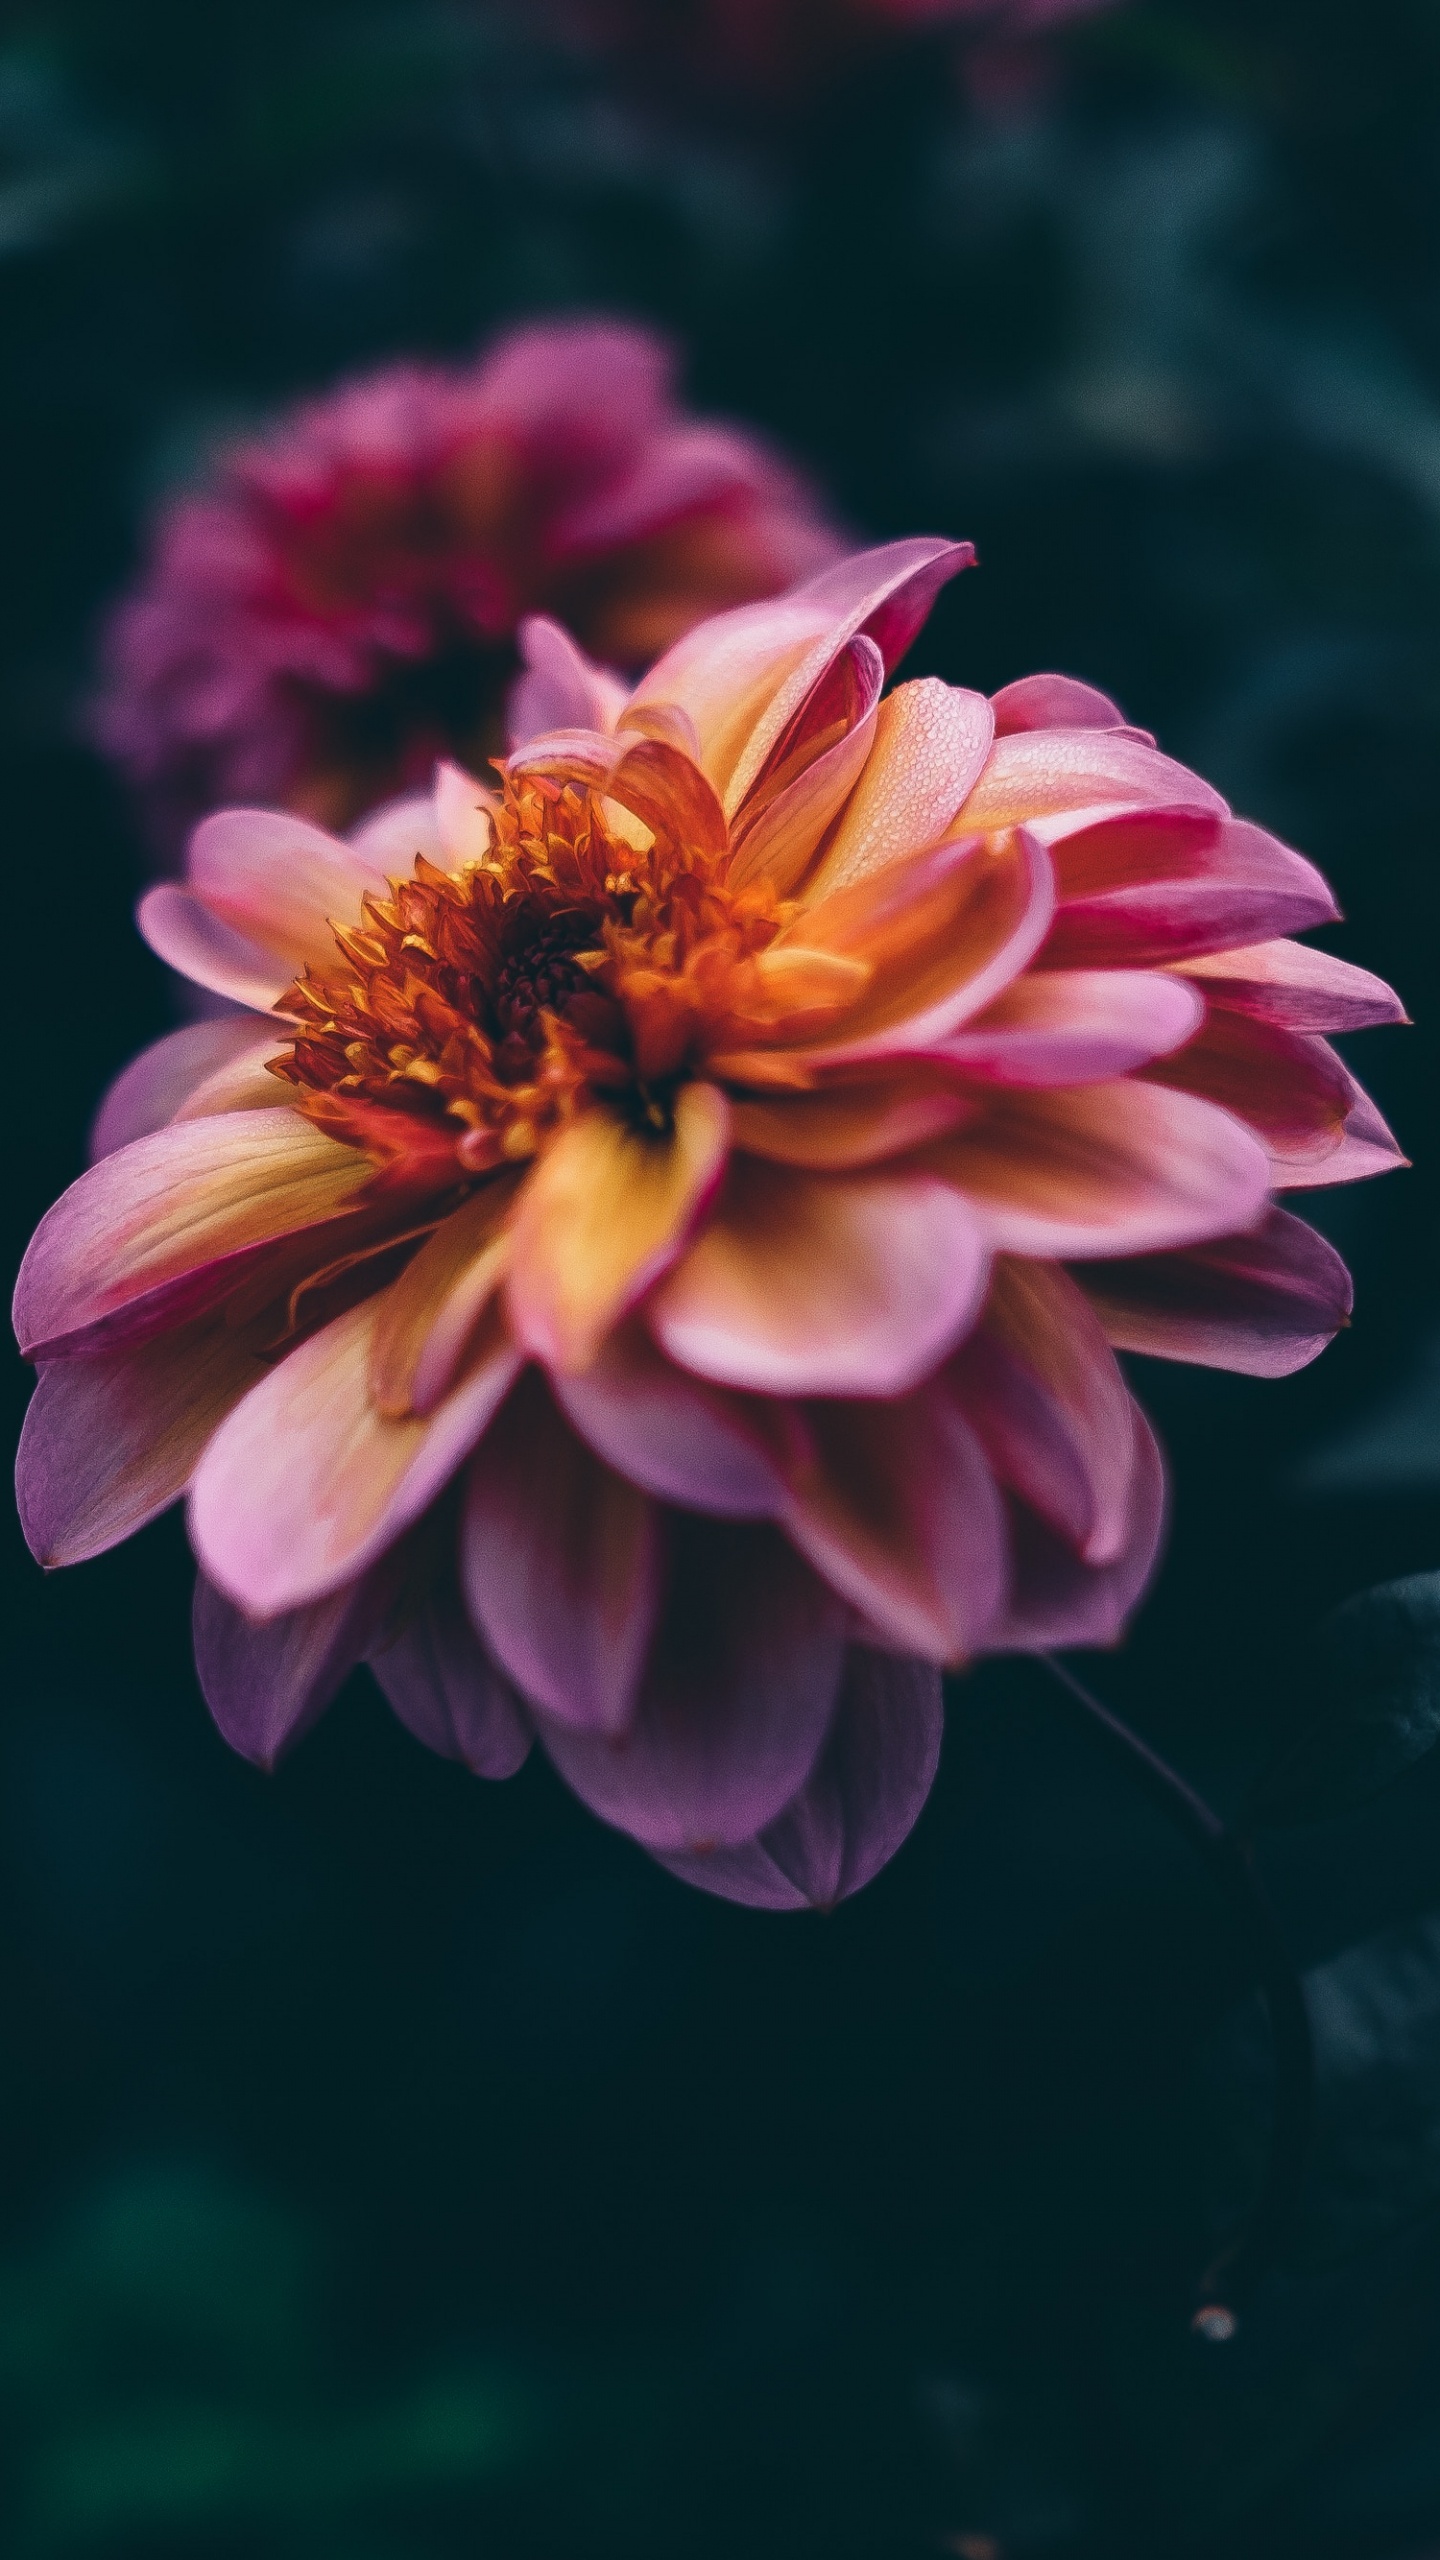 Pink and Yellow Flower in Tilt Shift Lens. Wallpaper in 1440x2560 Resolution